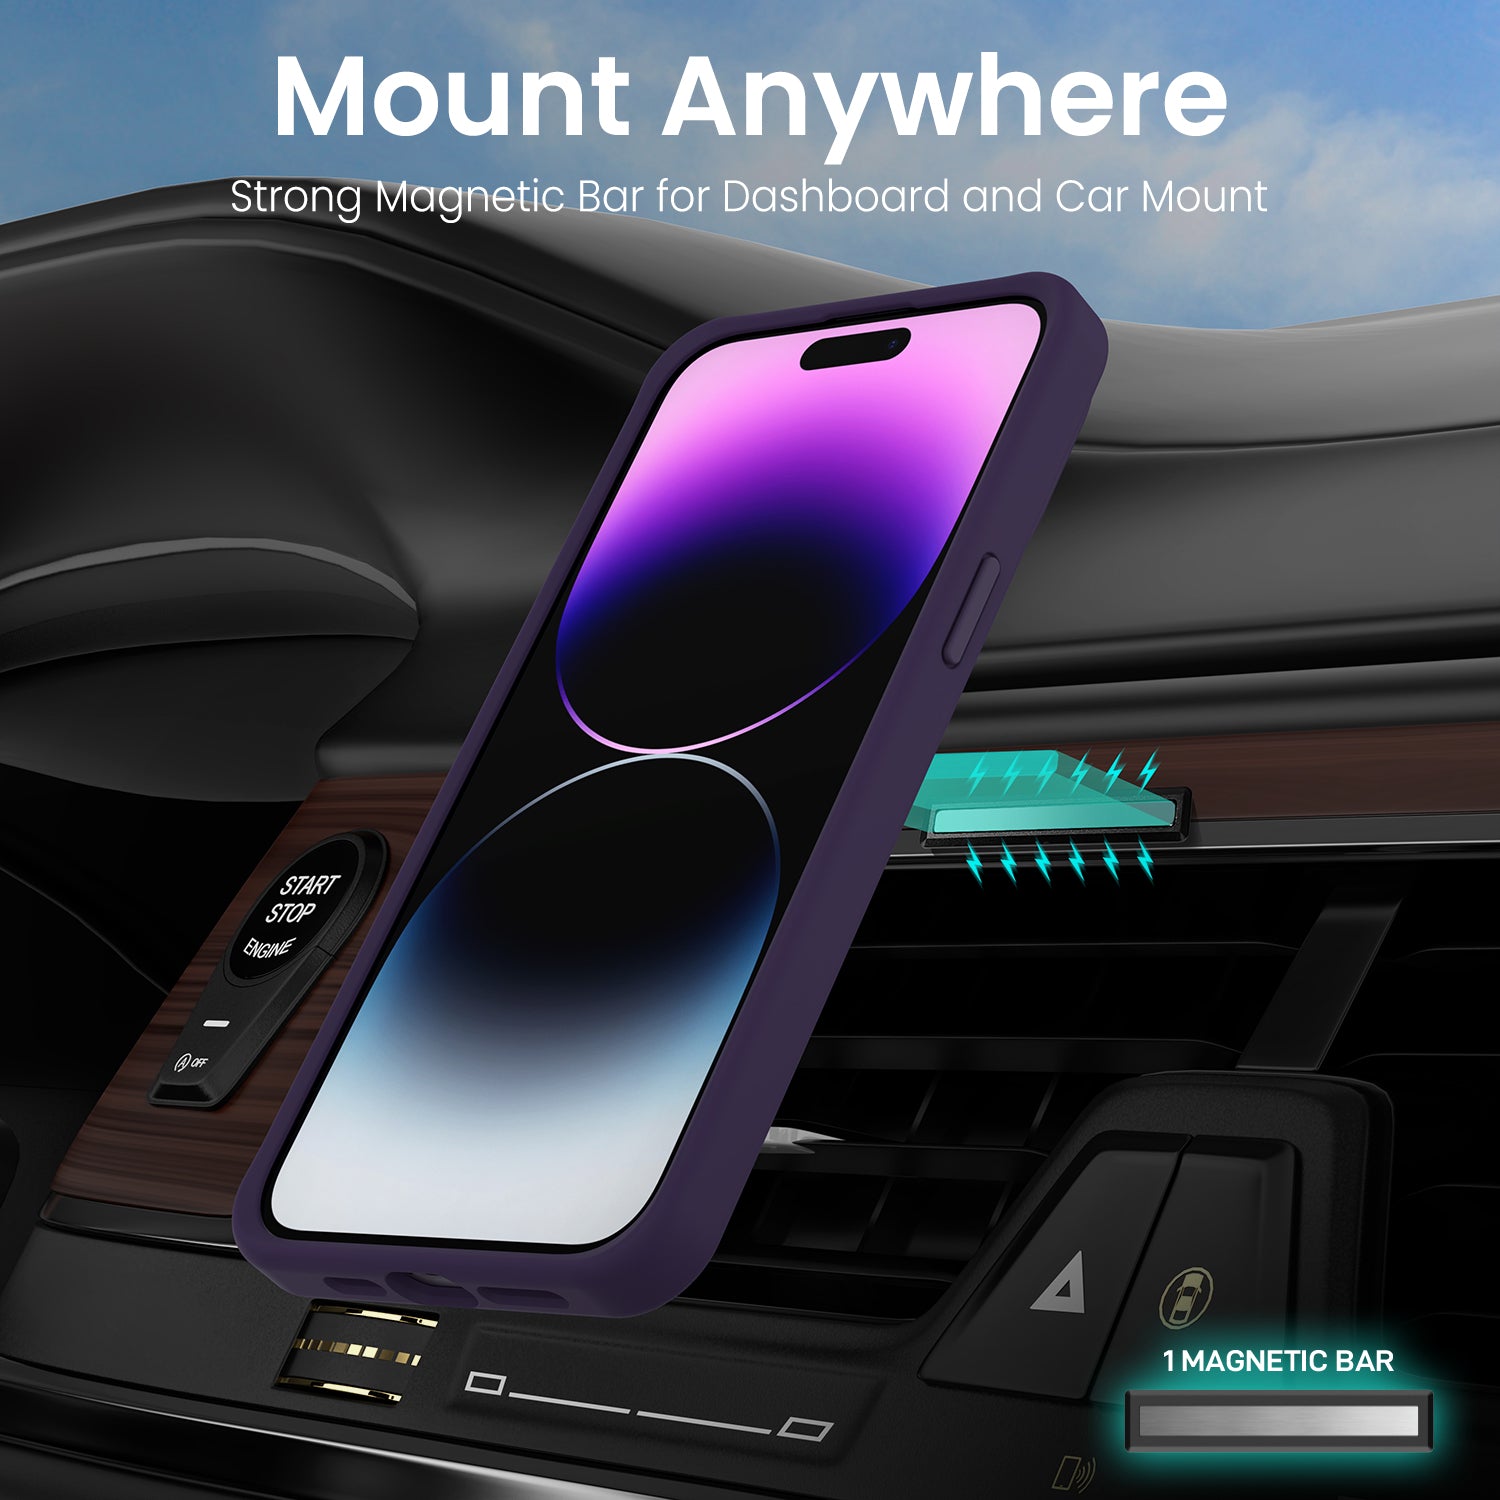 Remson Mag-X Magnetic Hybrid Protective Silicone Case Military Grade Protection Compatible For iPhone 14 Pro Max - Deep Purple